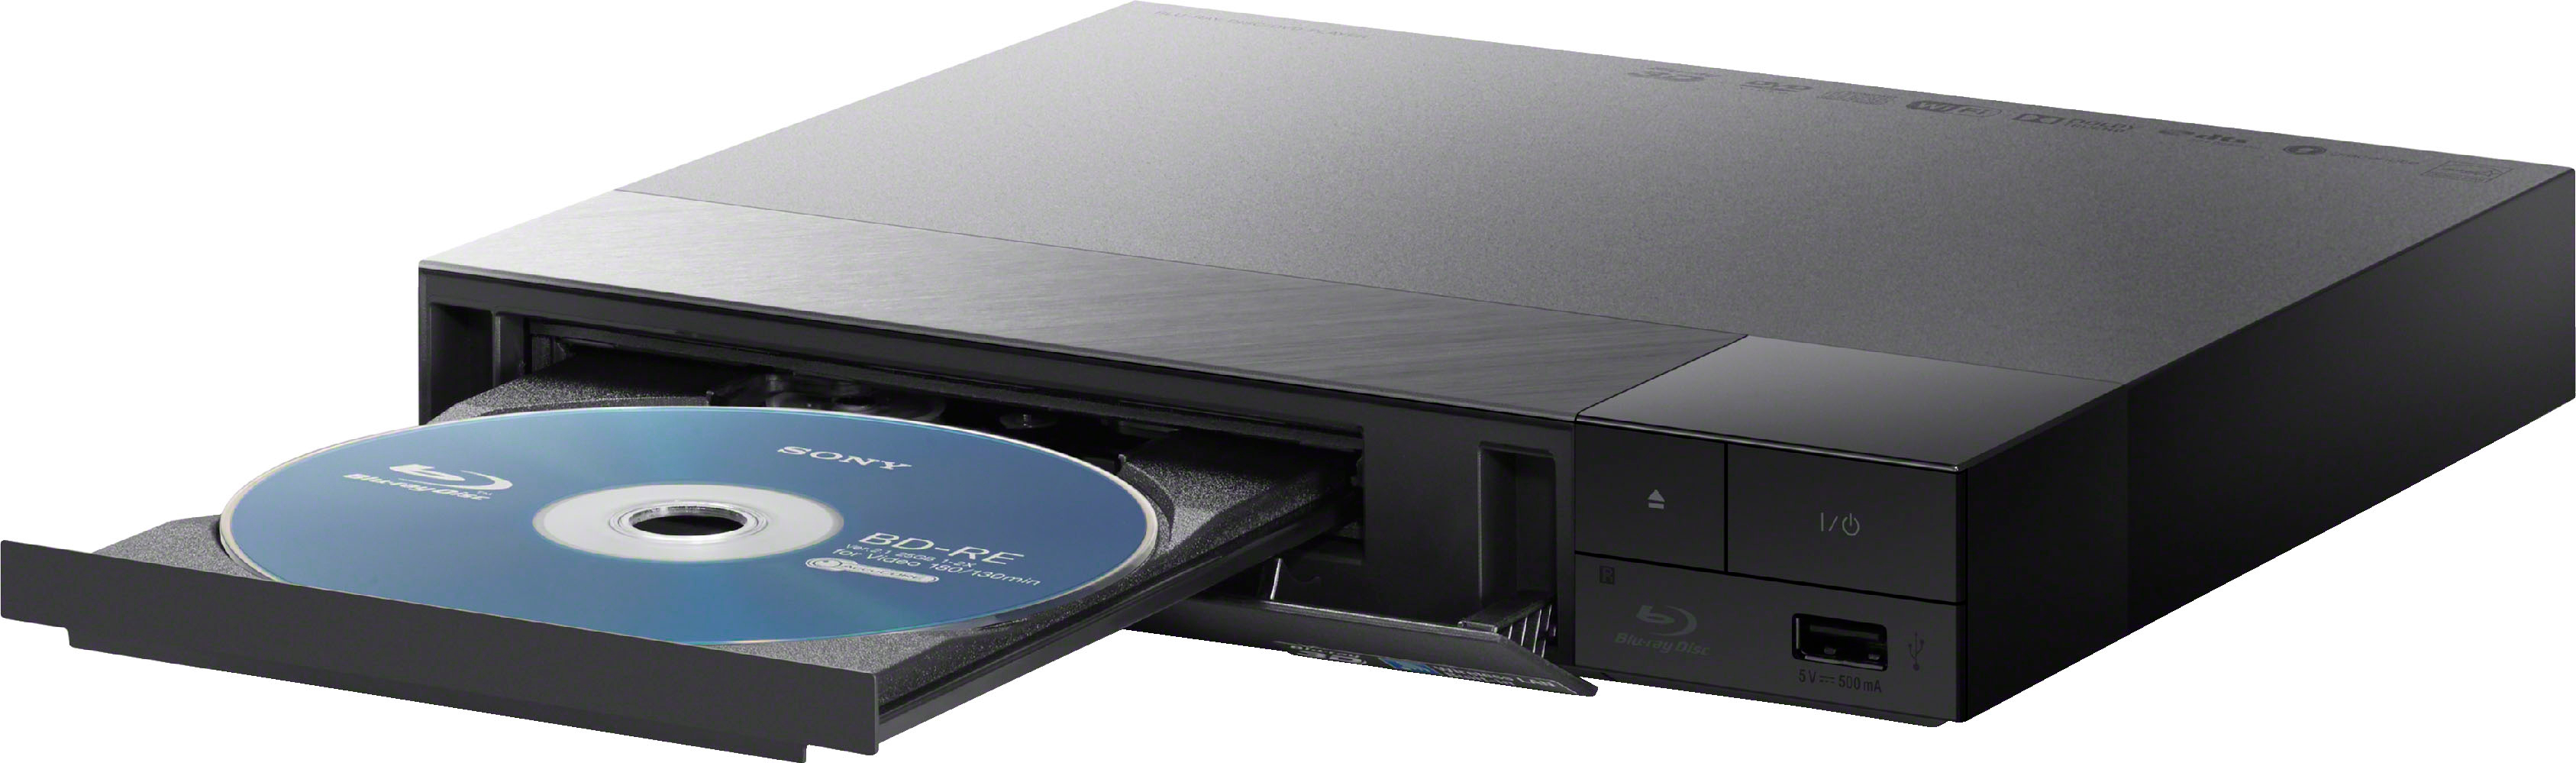 Sony Streaming Blu-ray Disc player with Built-In Wi-Fi and HDMI 